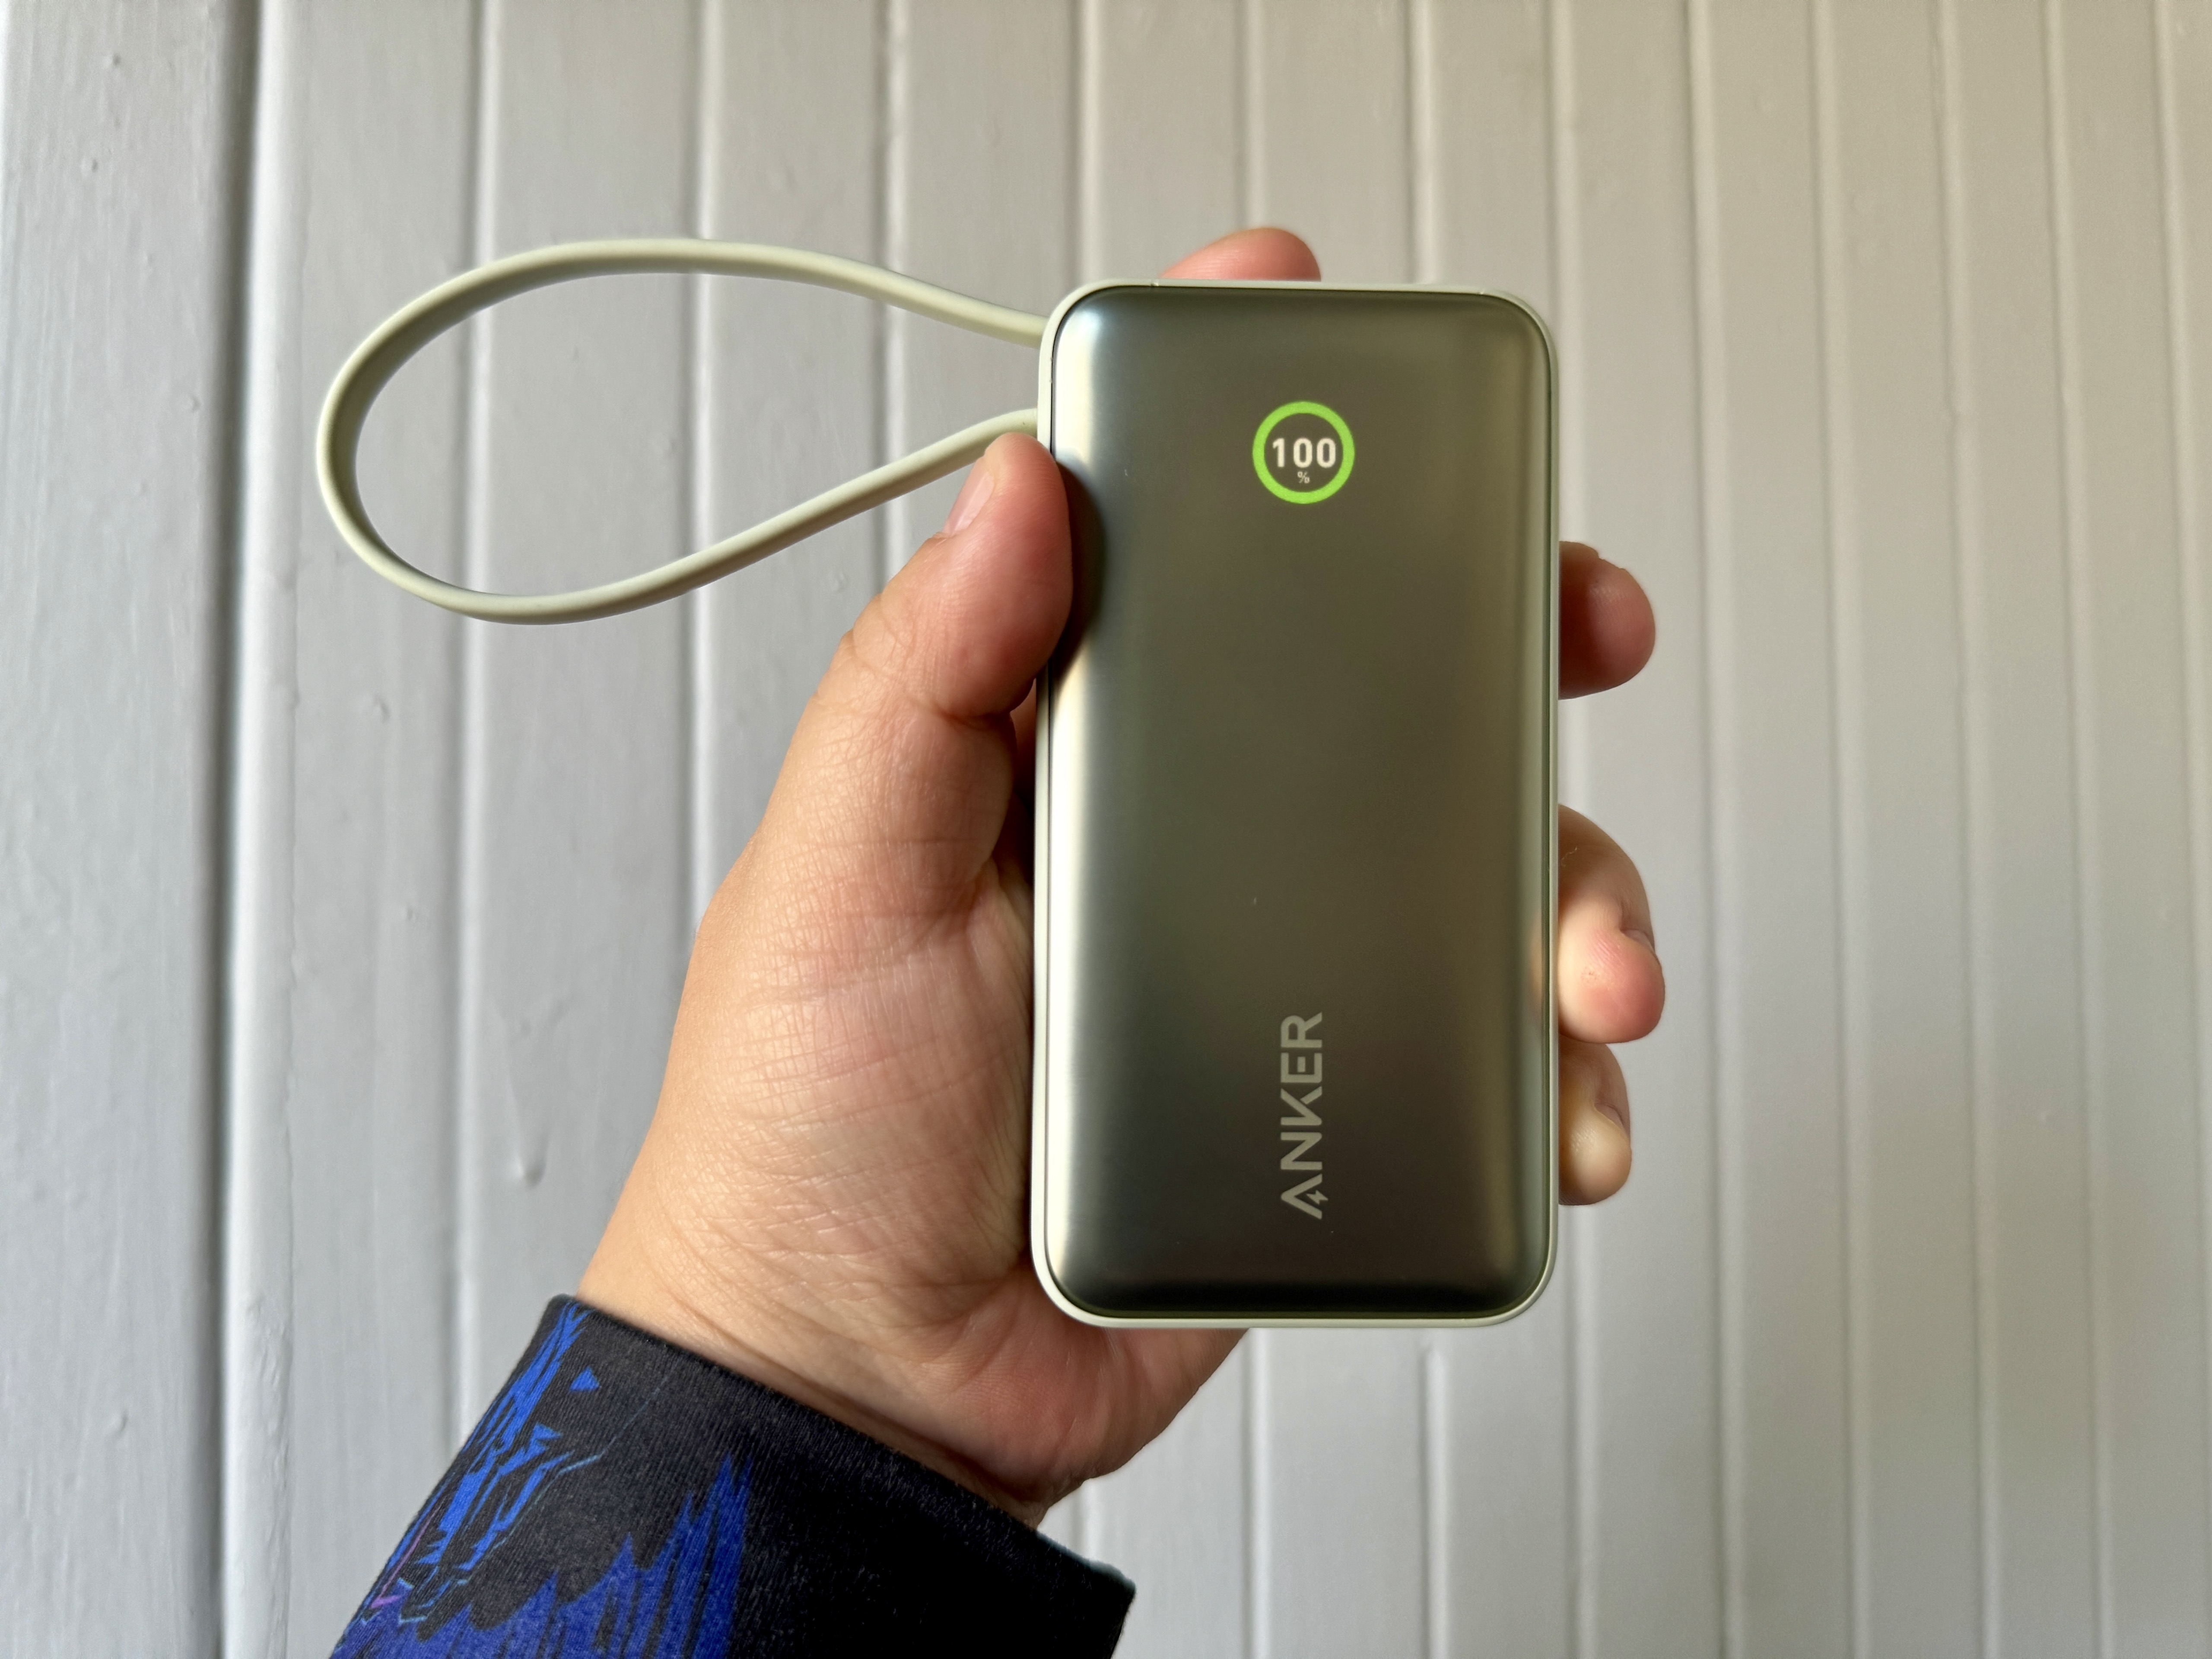 Anker Nano 30W Power Bank with USB-C in green in hand